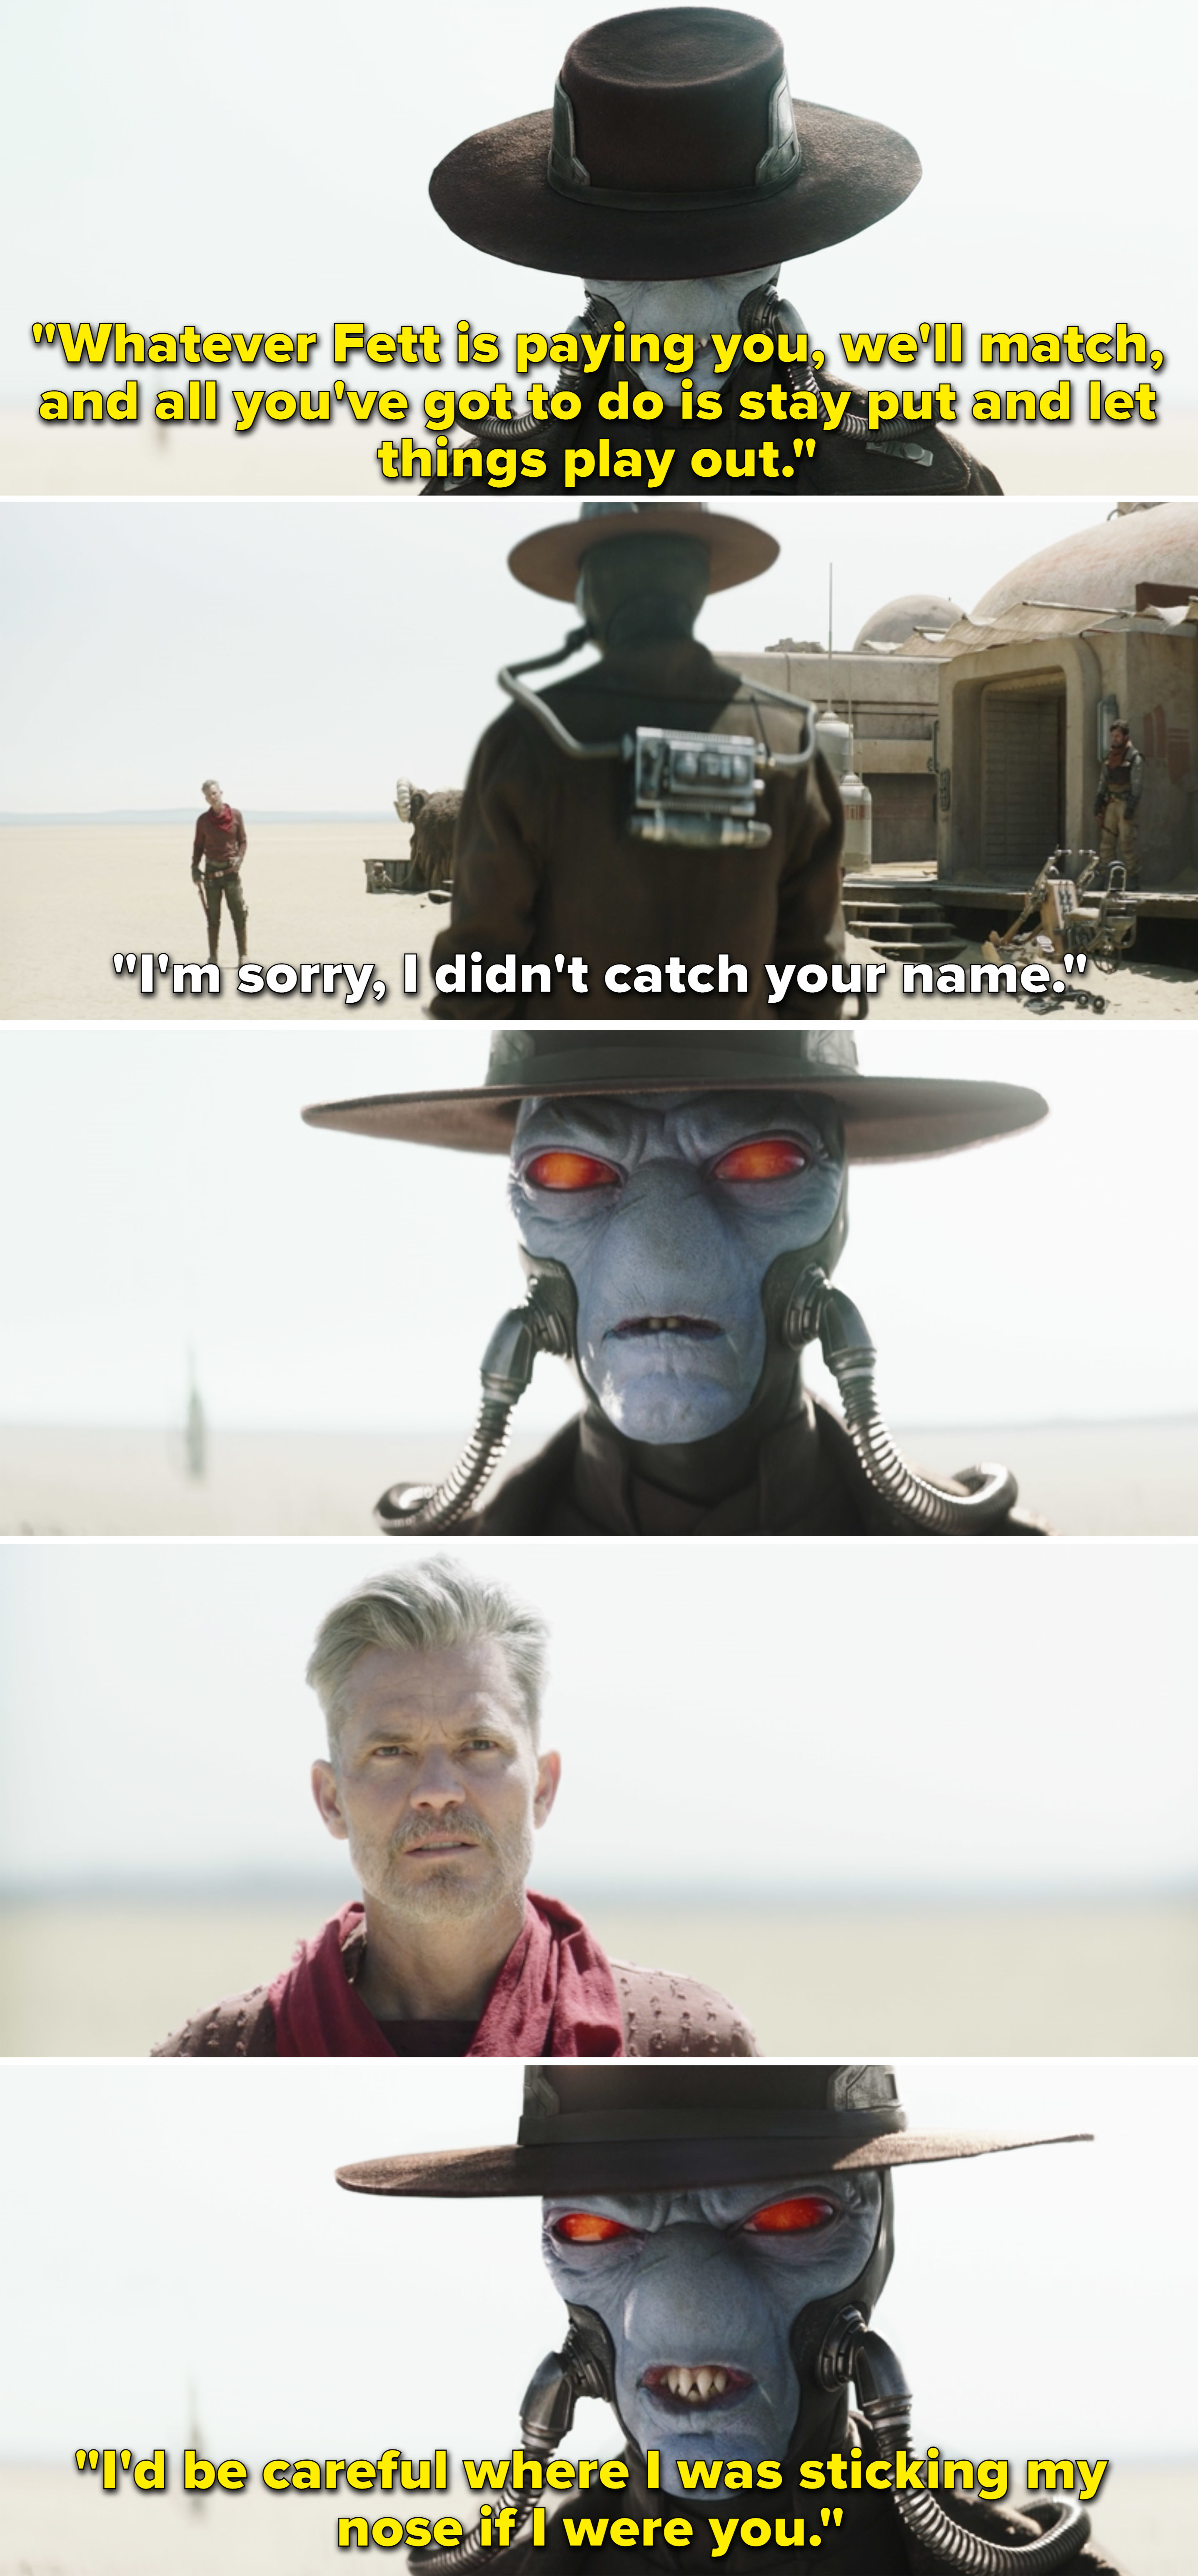 Cad Bane telling Vanth, &quot;I&#x27;d be careful where I was sticking my nose if I were you&quot;